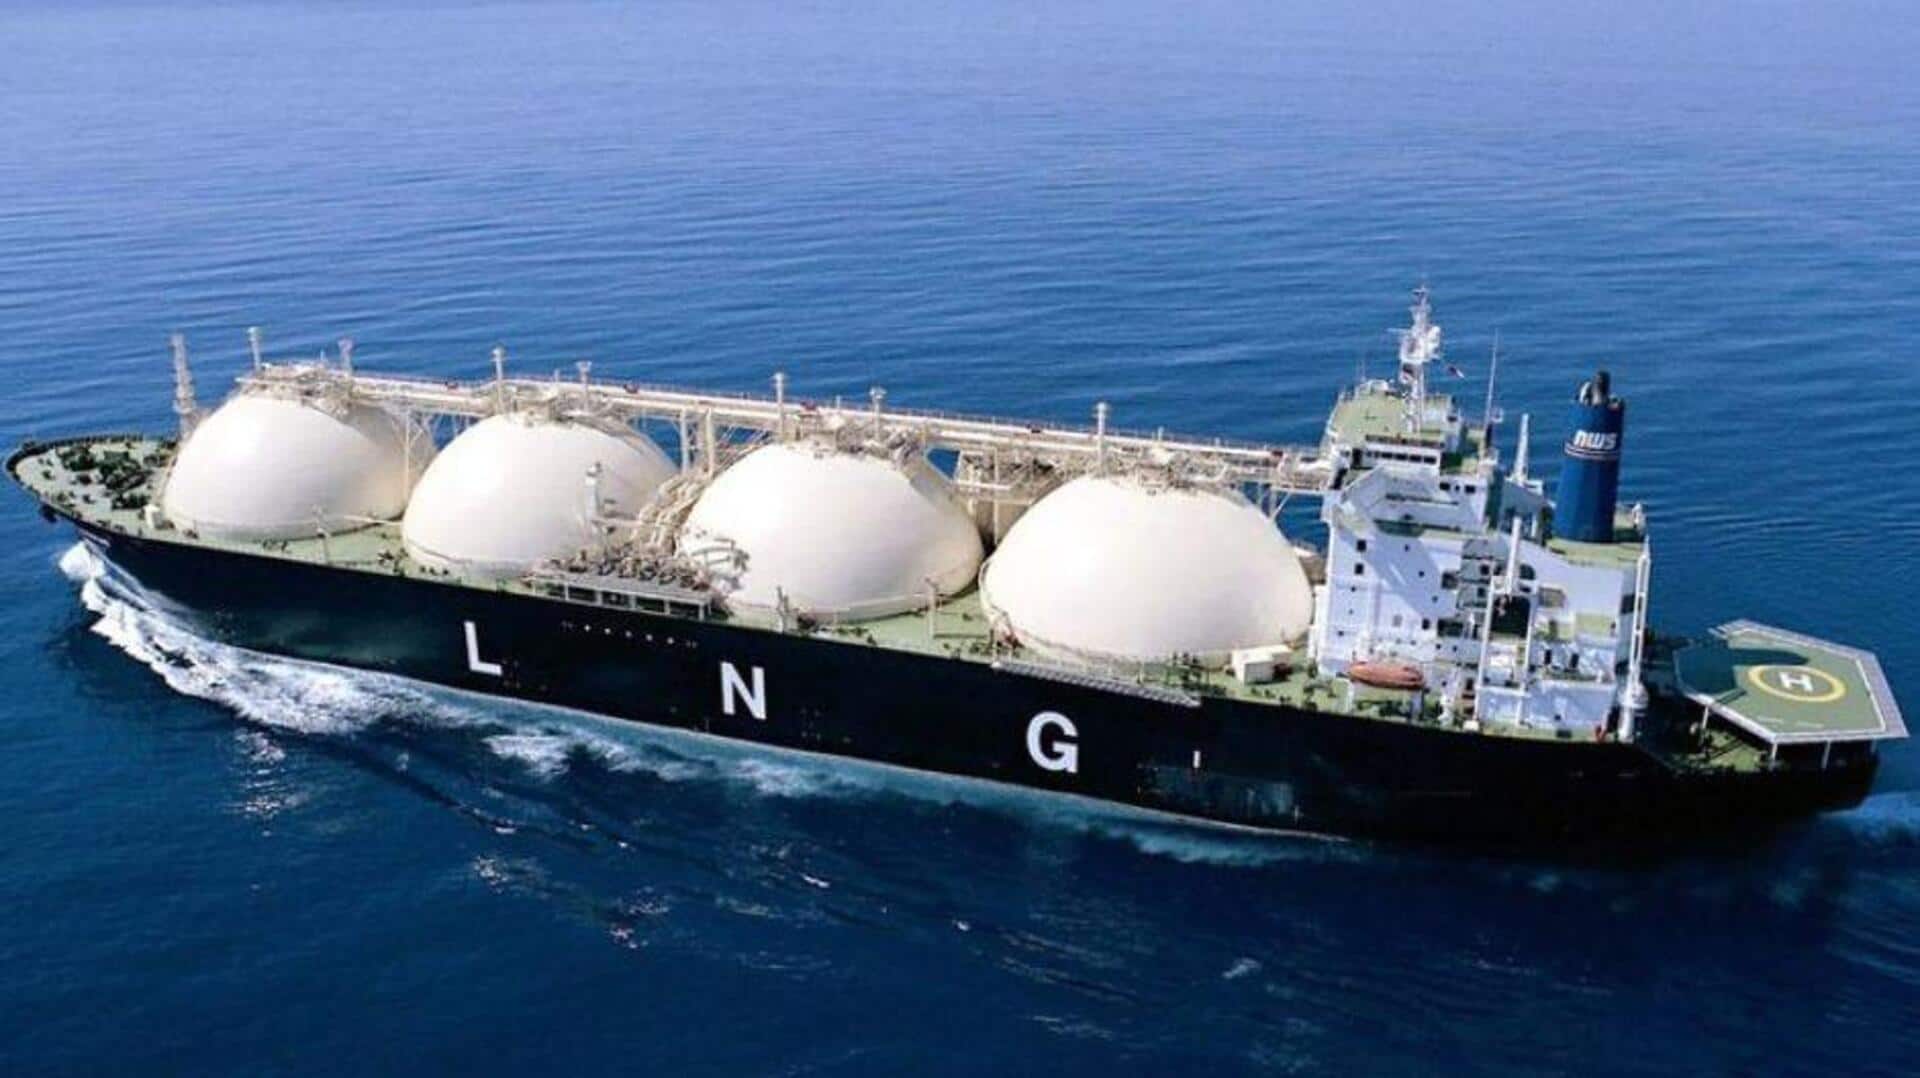 India's LNG imports surged by 26% in January: Here's why